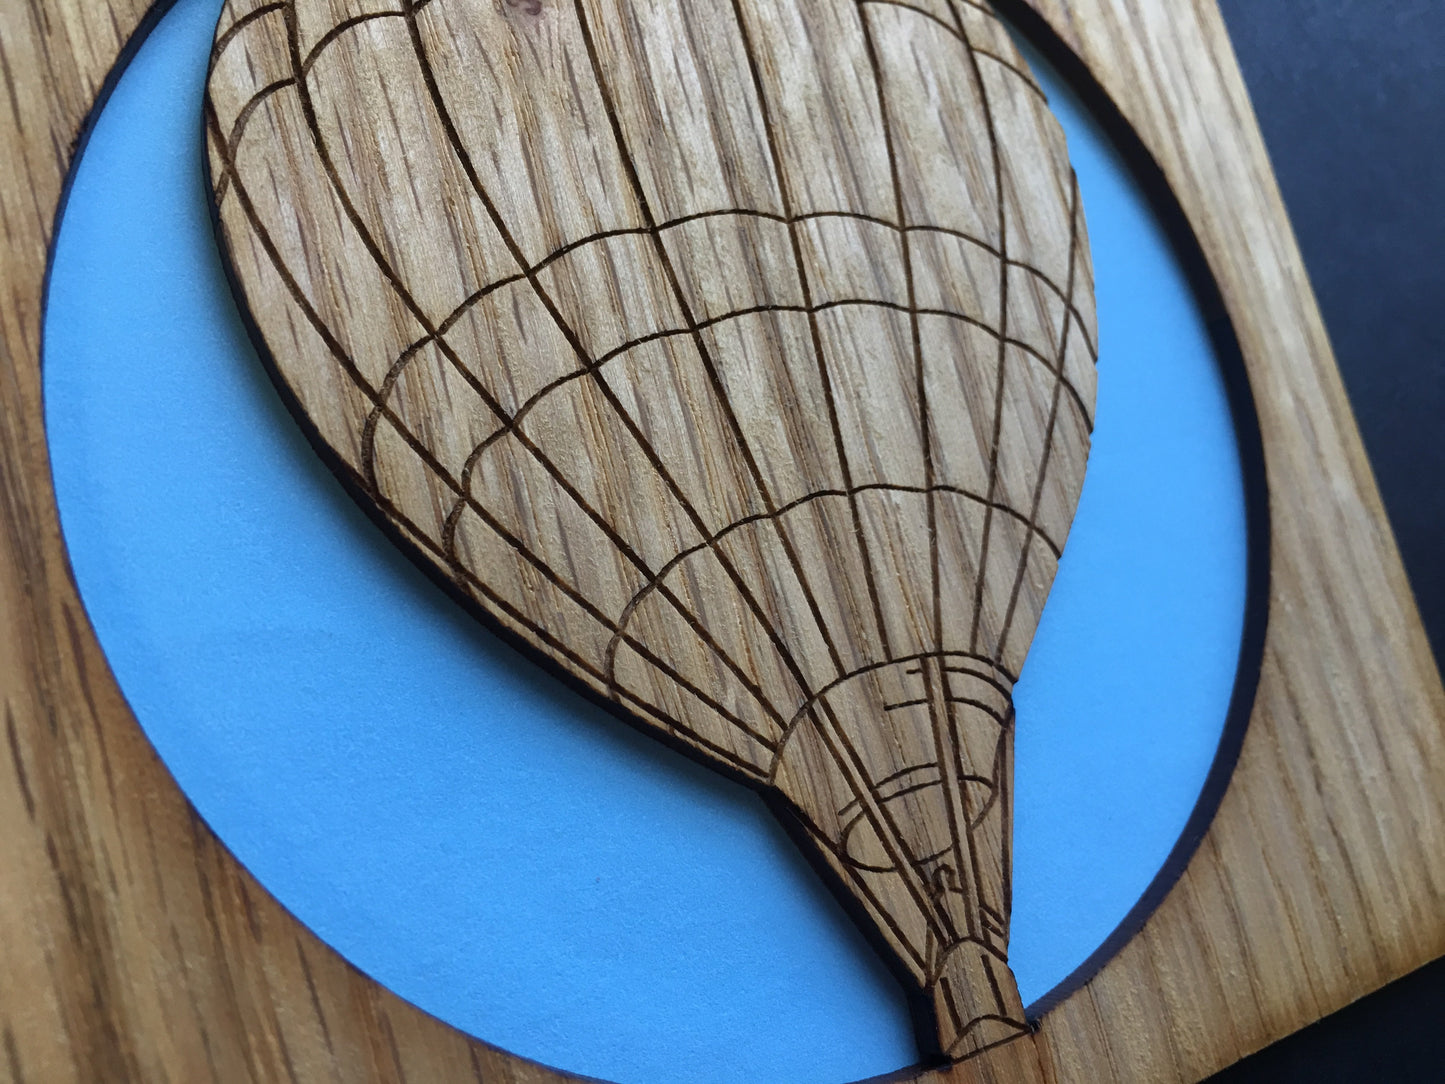 8x10 Hot Air Balloon Picture Frame, Picture Frame, home decor, laser engraved - Legacy Images